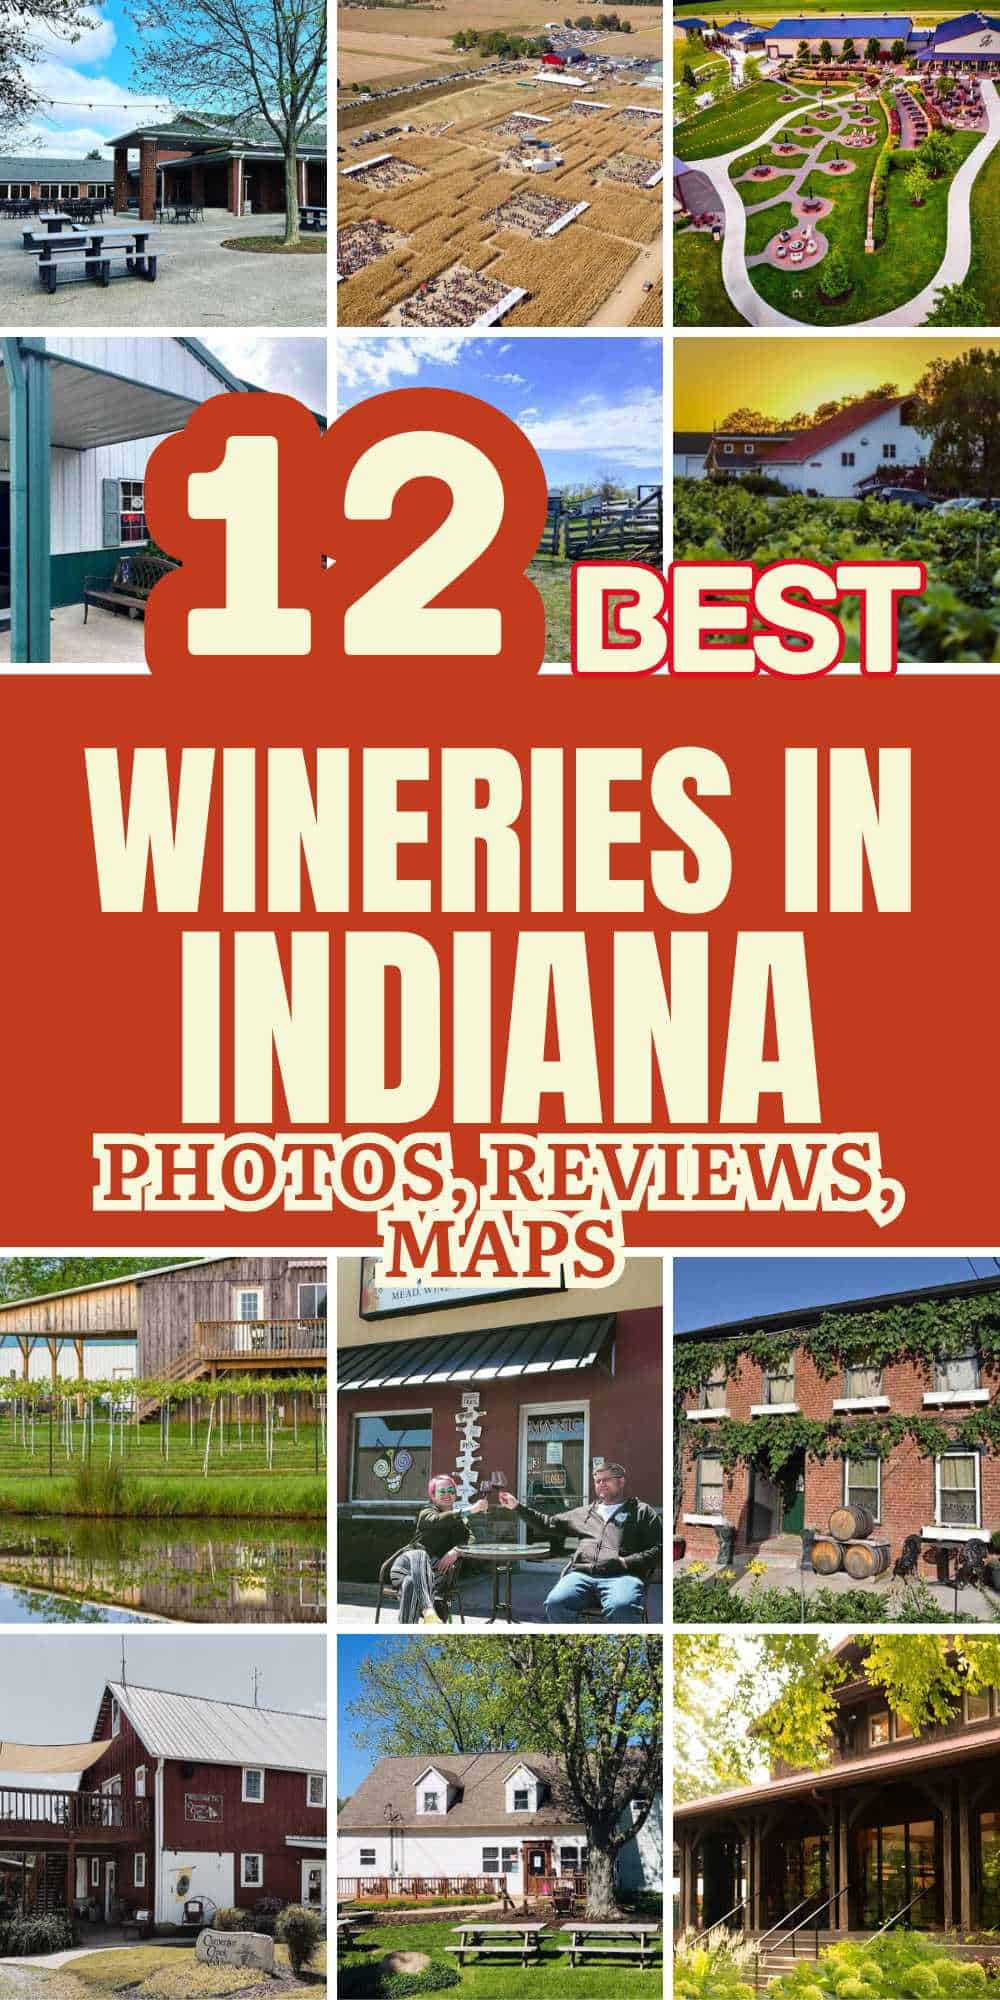 Best Wineries in Indiana